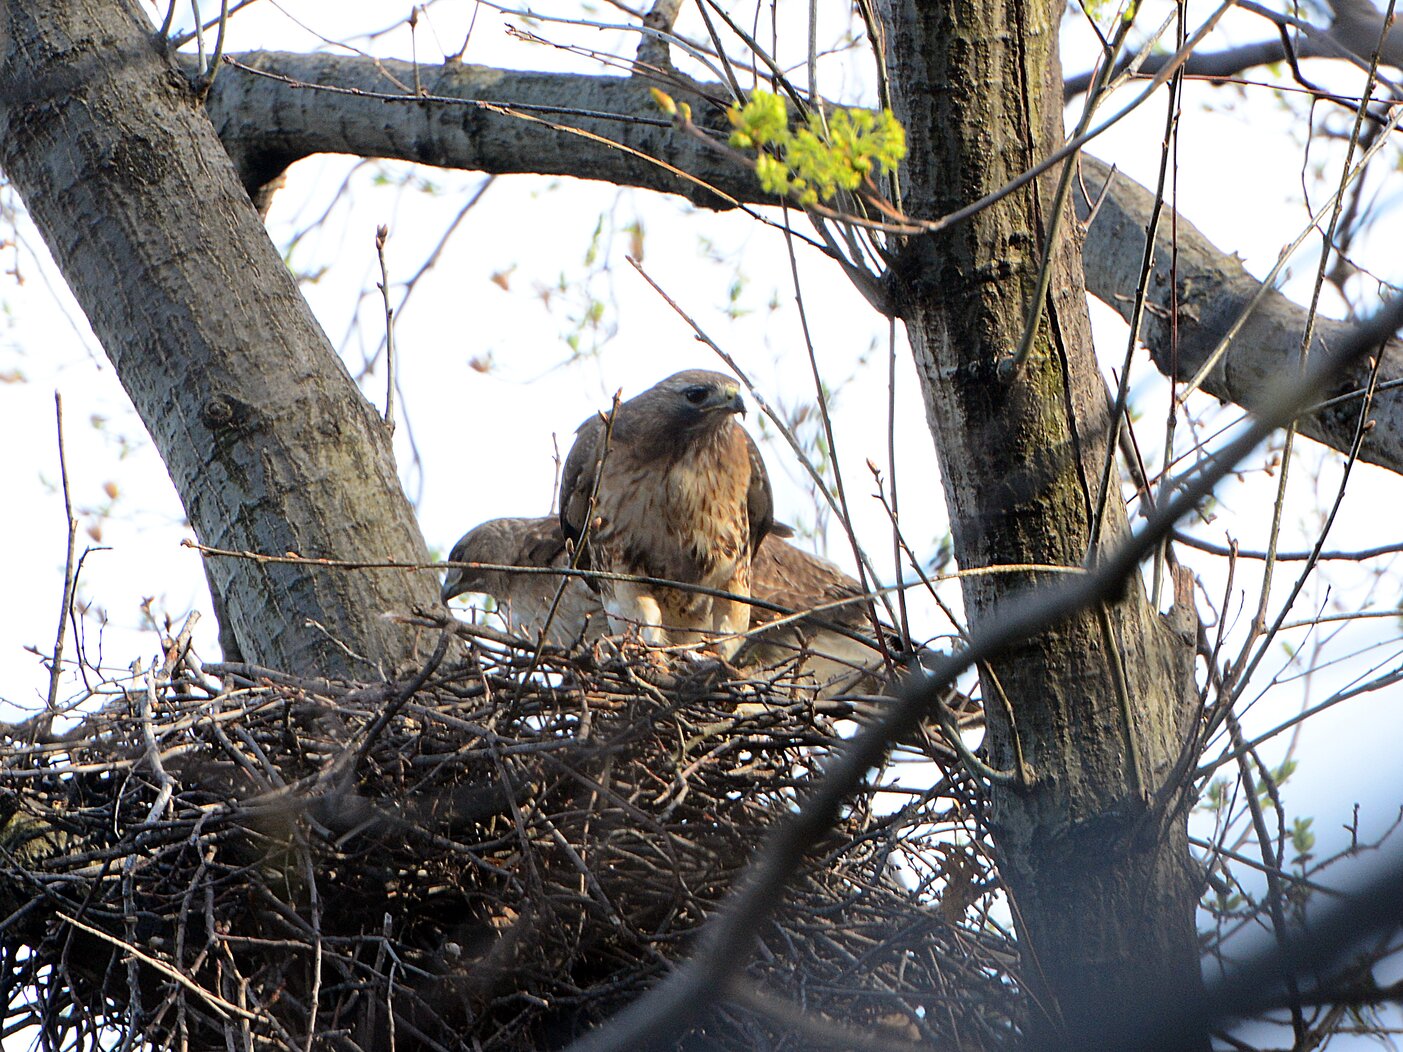 George and Martha” have been among the nesting Red-tailed Hawks known to local birders in Highbridge Park. Photo: Robert/CC BY-NC-ND 2.0